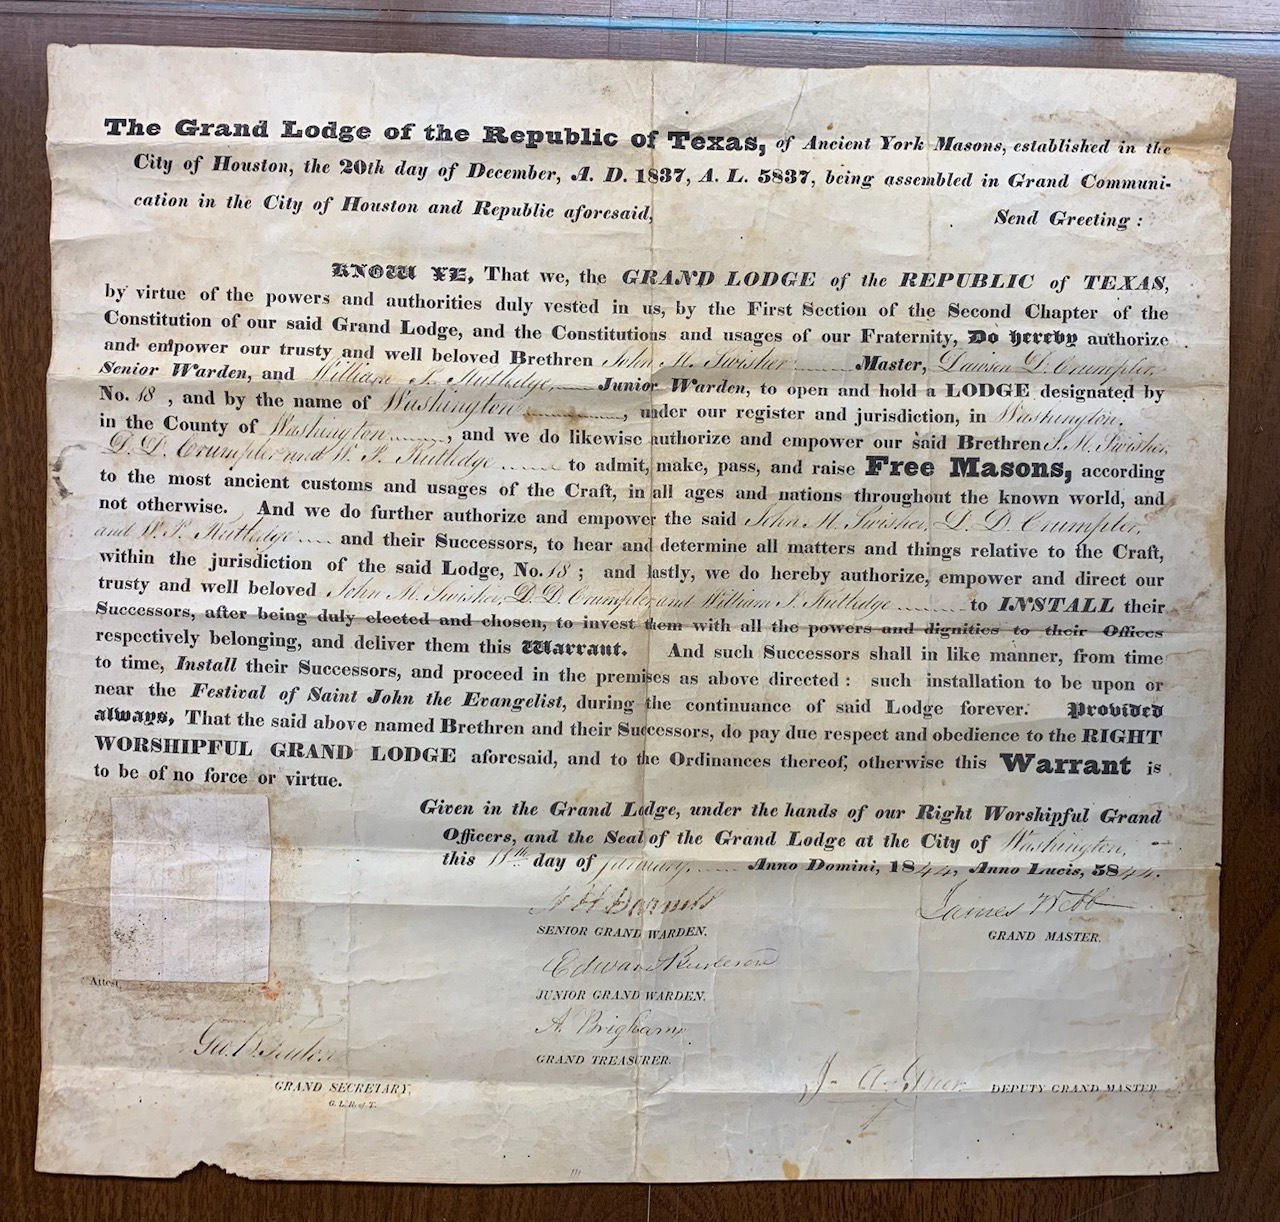 Original Charter of Washington Lodge #18 from the Grand Lodge of the Republic of Texas in 1844